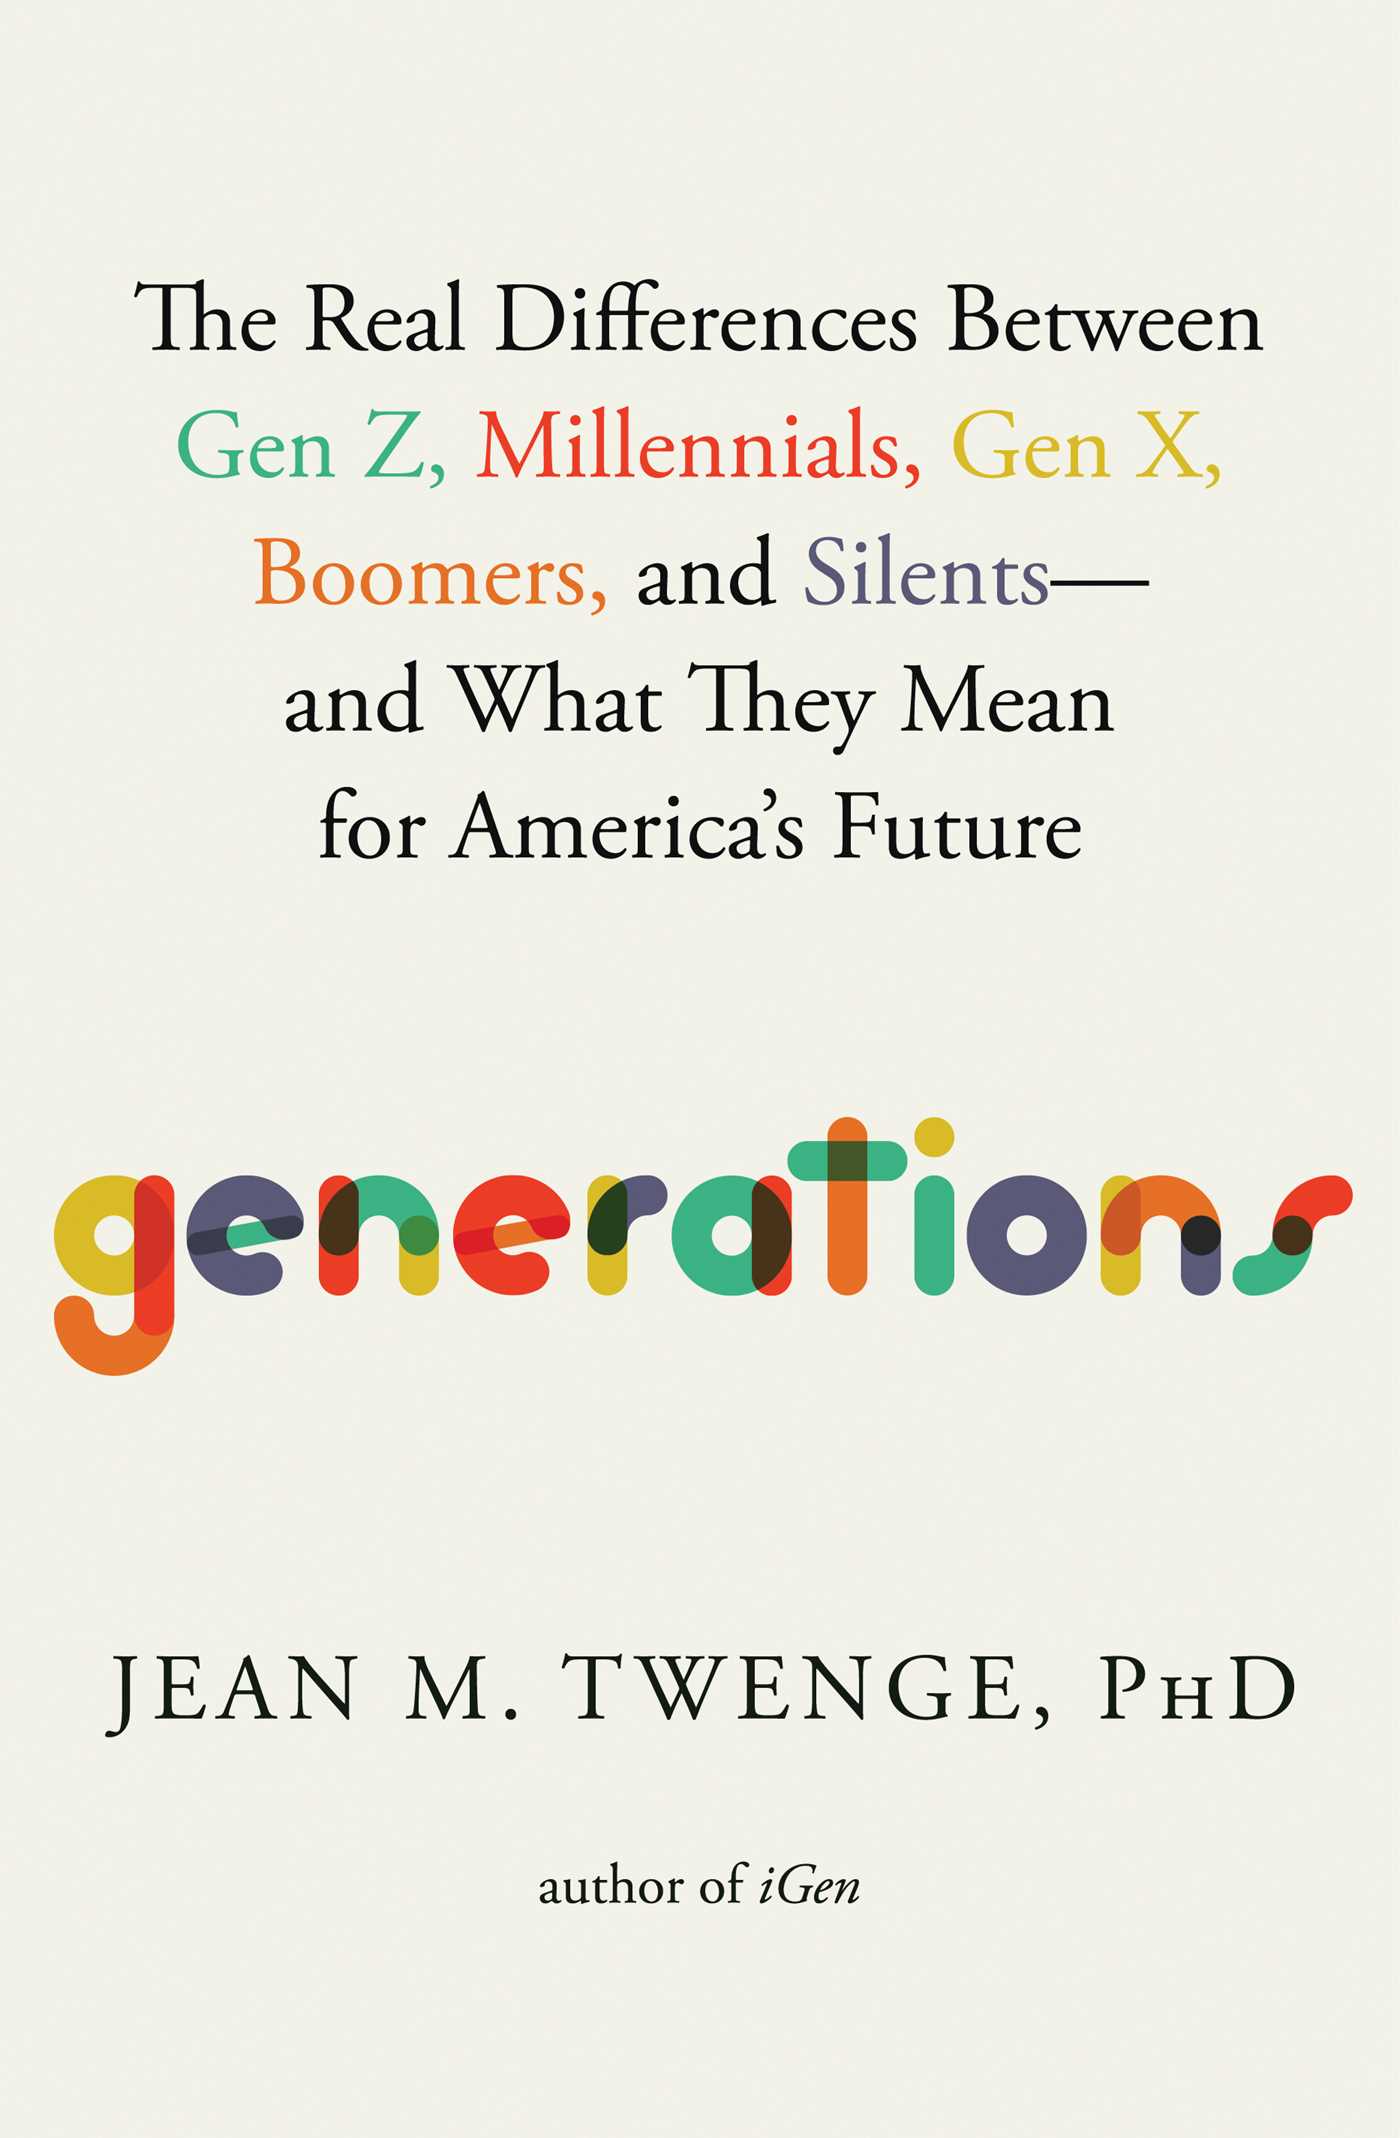 Generations The Real Differences Between Gen Z, Millennials, Gen X, Boomers, and Silents--and What They Mean for America's Future cover image